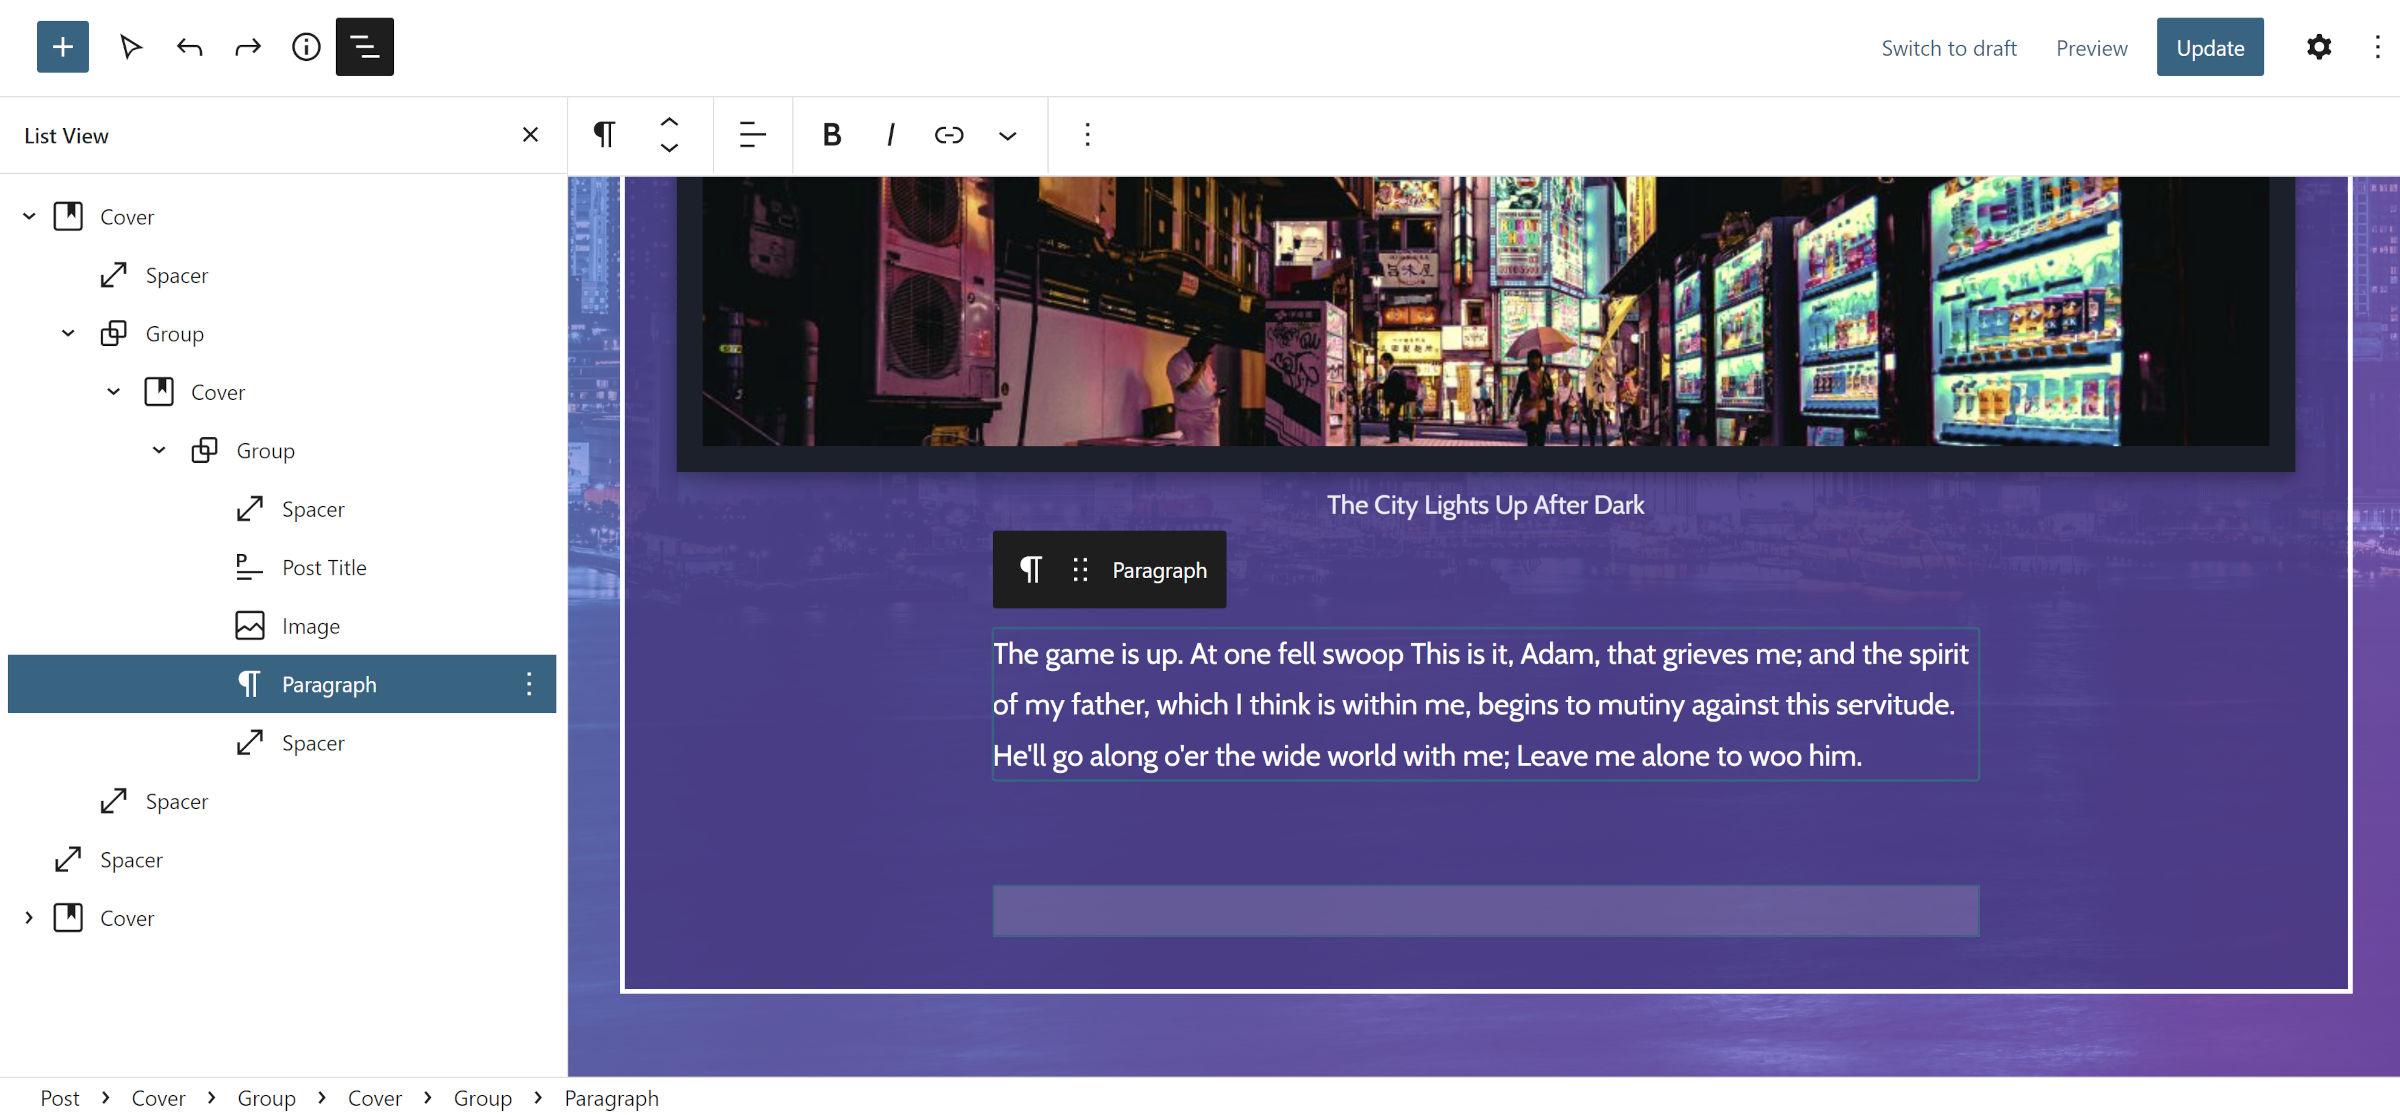 WordPress post editor with an image followed, by a paragraph and spacer inside of a set of containers with a purple background.